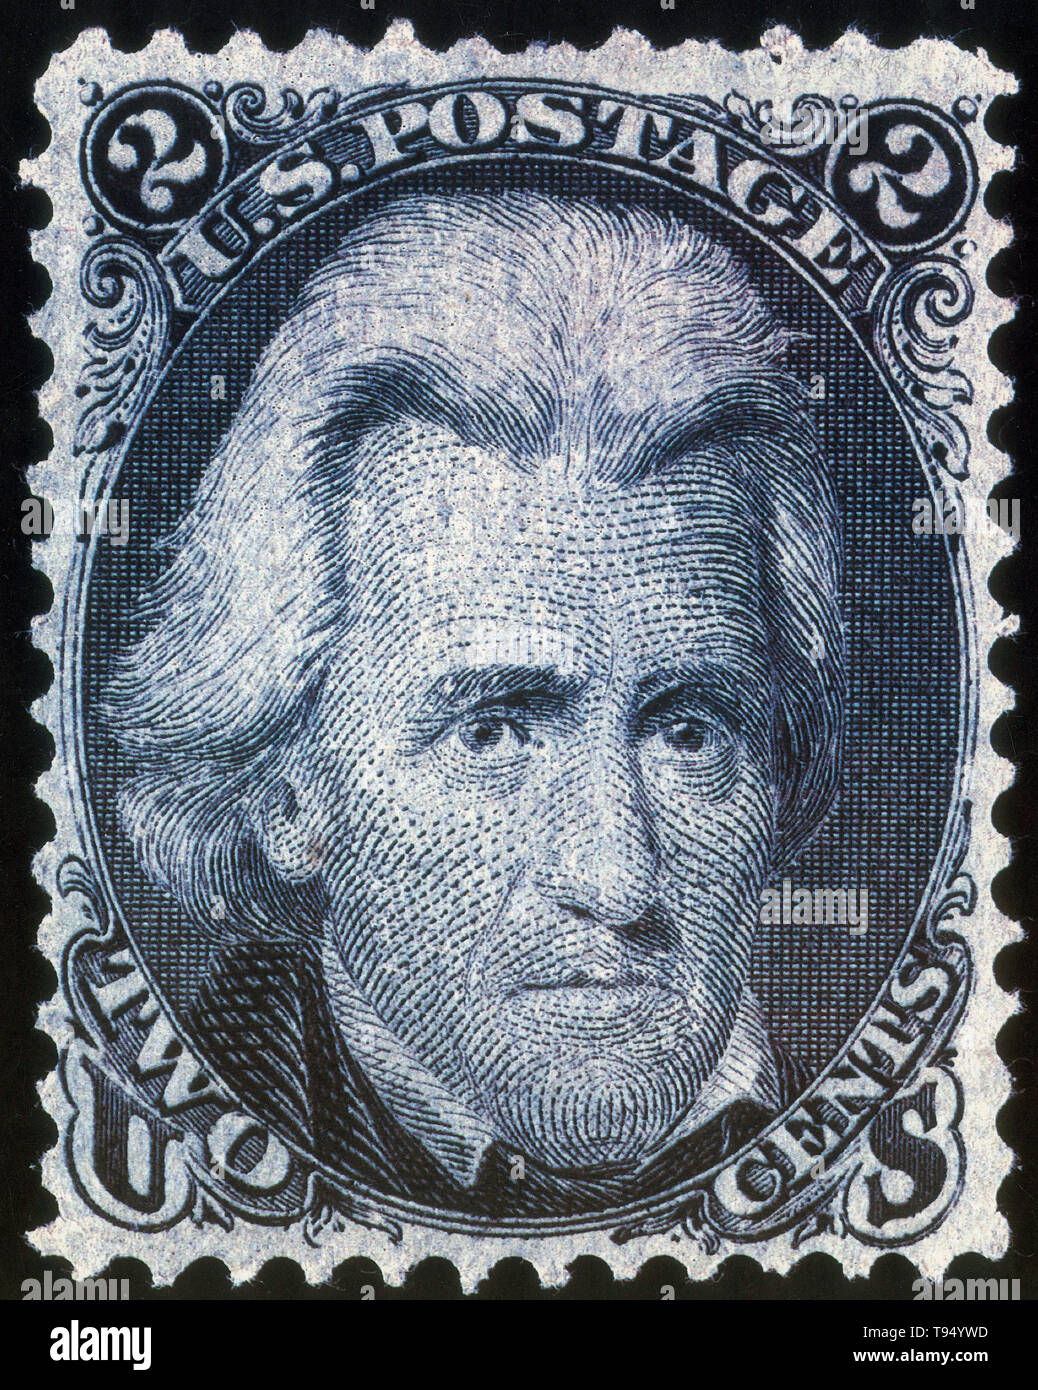 Black Jack or Blackjack was the 2¢ denomination United States postage stamp issued from July 1, 1863 to 1869, is generally referred to as the 'Black Jack' due to the large portraiture of the United States President, Andrew Jackson on its face printed in pitch black. Stock Photo